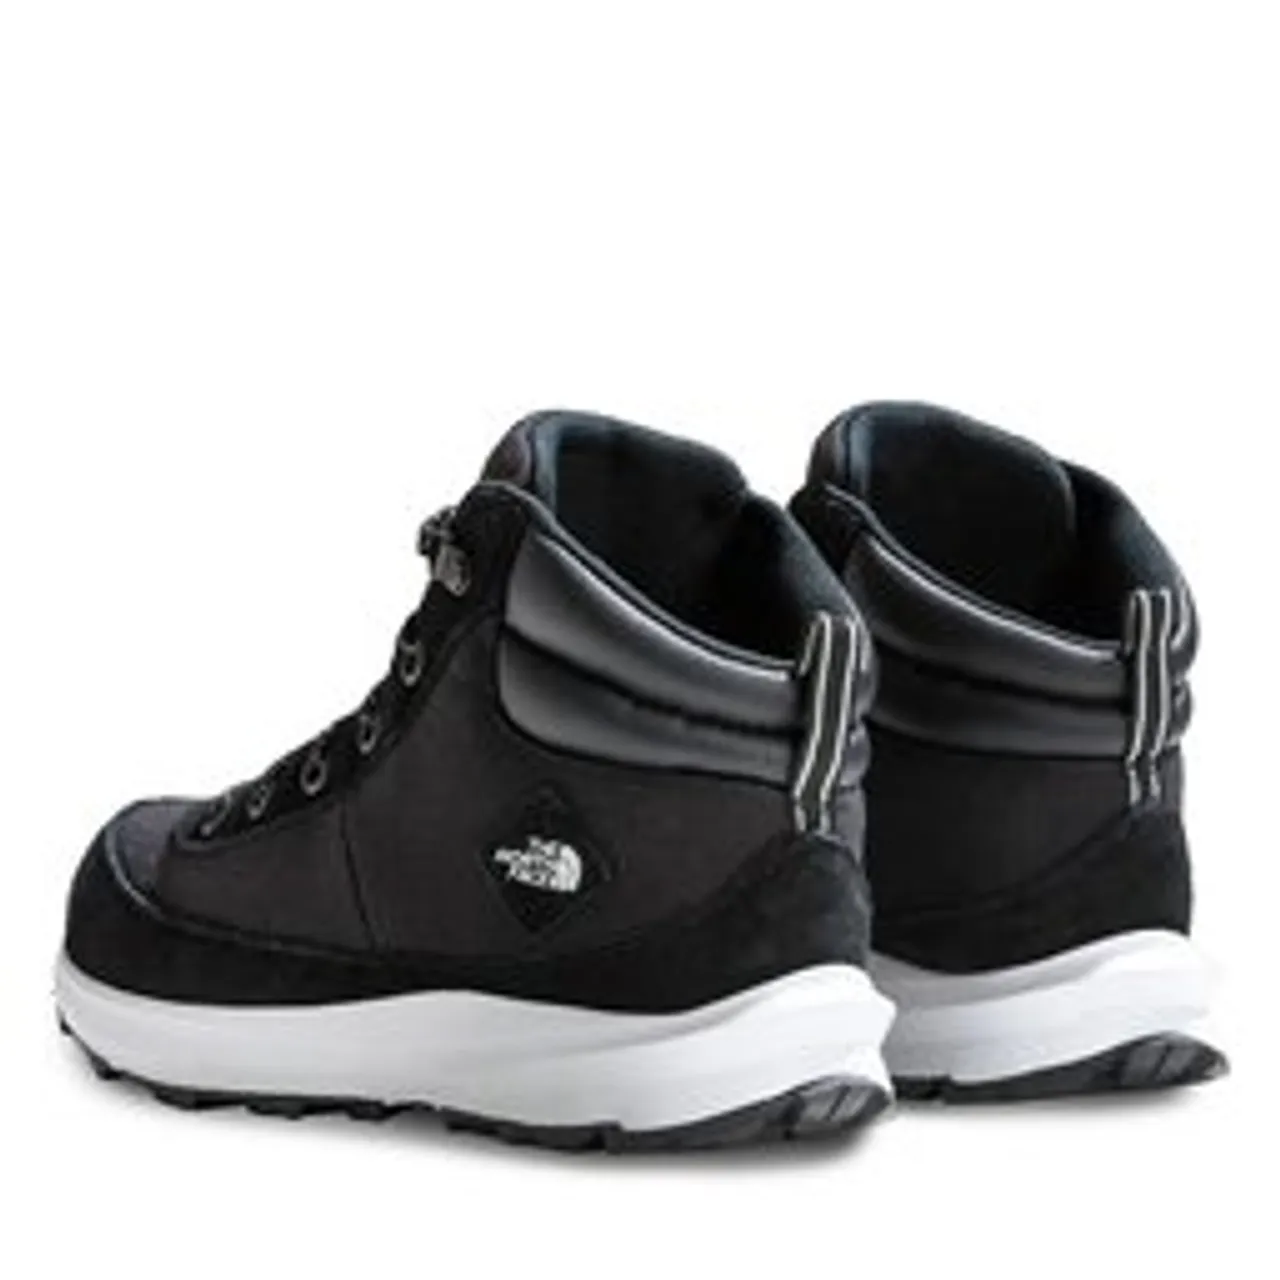 Trekkingschuhe The North Face Y Back-To-Berkeley Iv HikerNF0A7W5ZKY41 Tnf Black/Tnf White